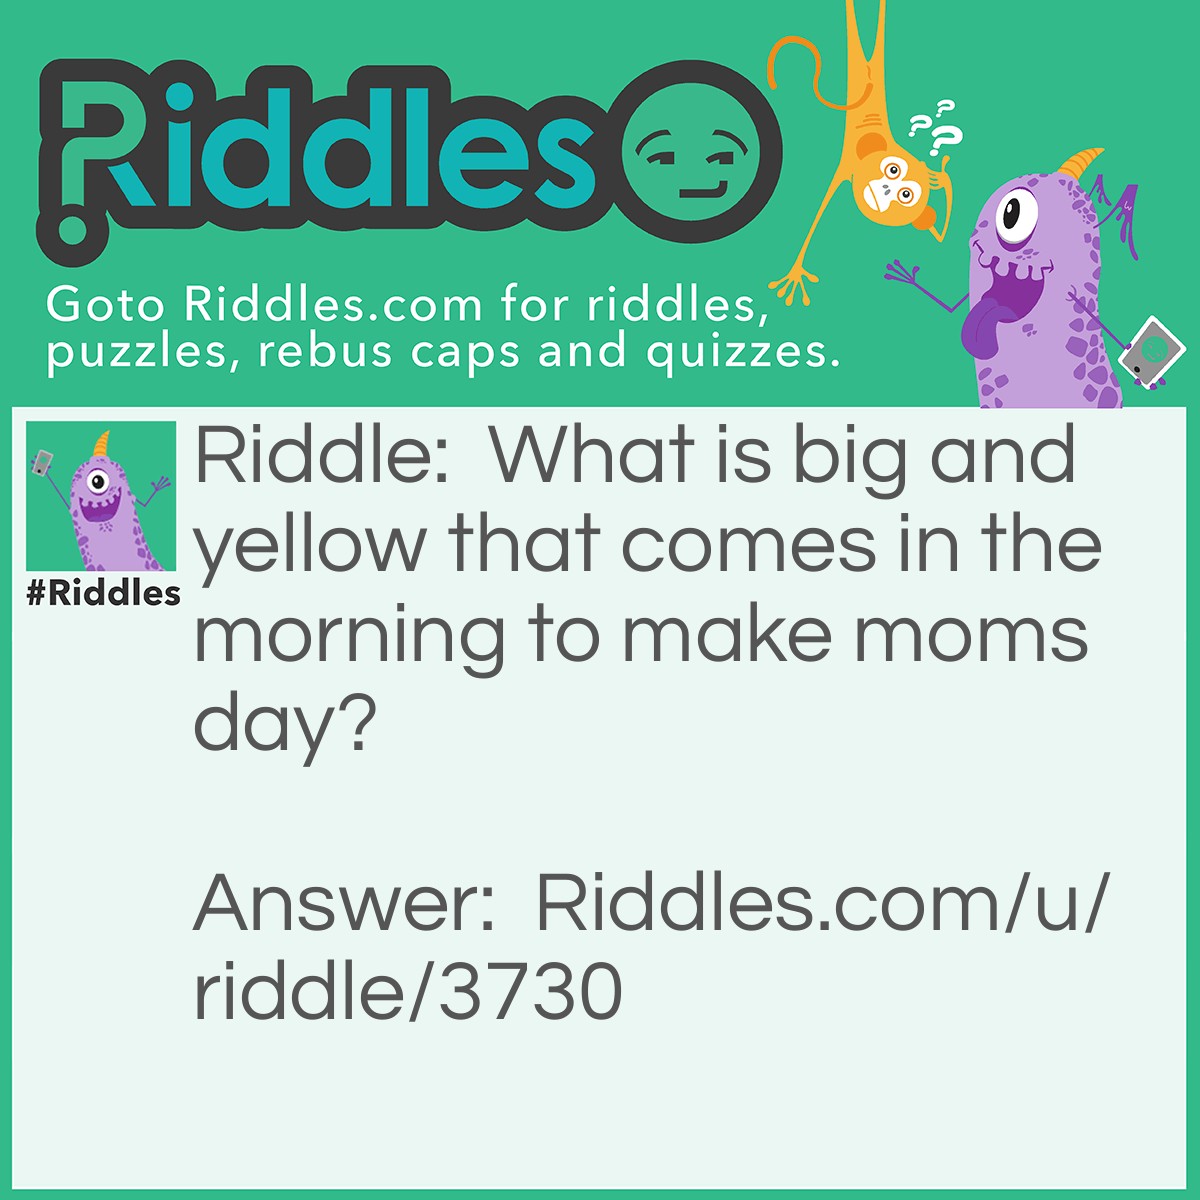 Riddle: What is big and yellow that comes in the morning to make moms day? Answer: A school bus.